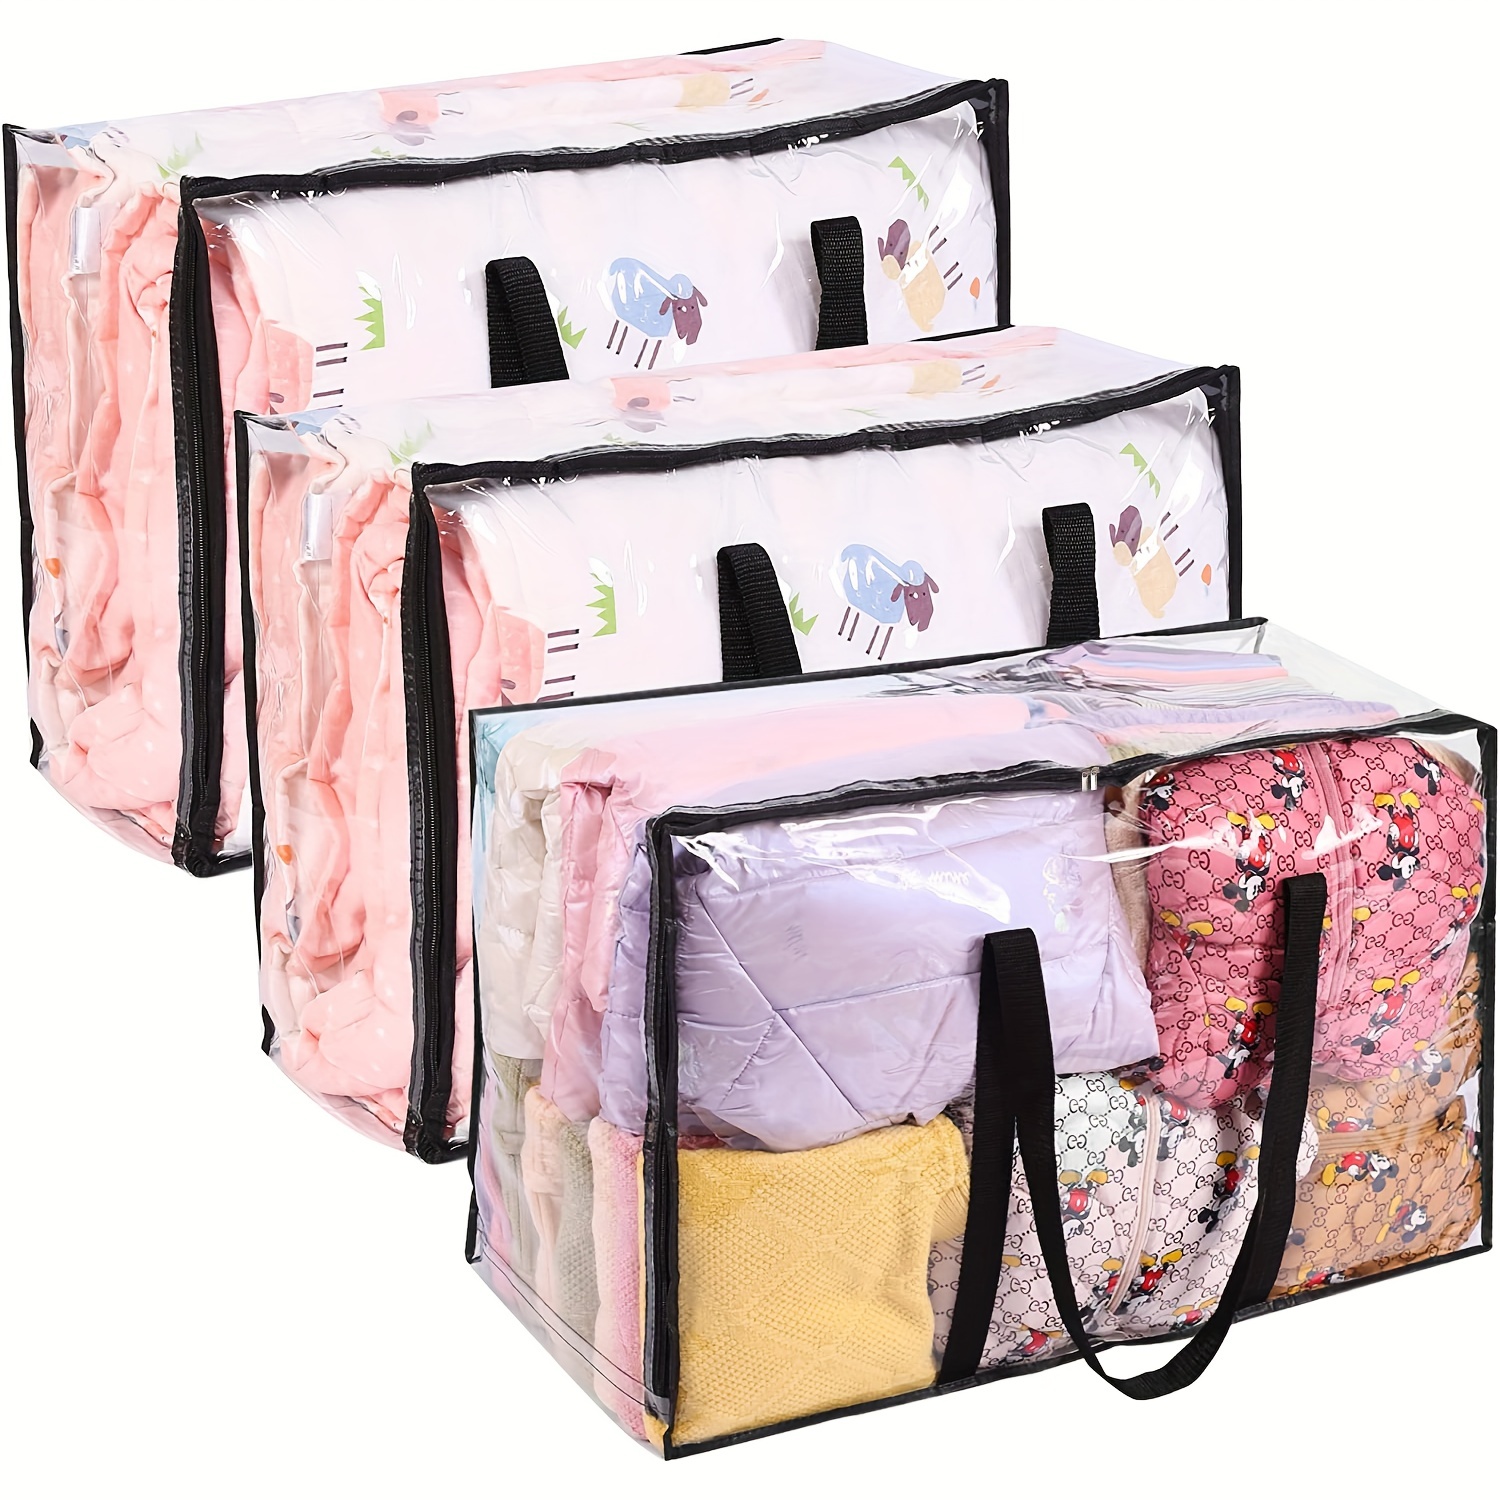 Pack Of 2 Storage Bags With Zipper - Large Storage Bag For Clothes,  Bedding, Quilts, Blankets And Moving